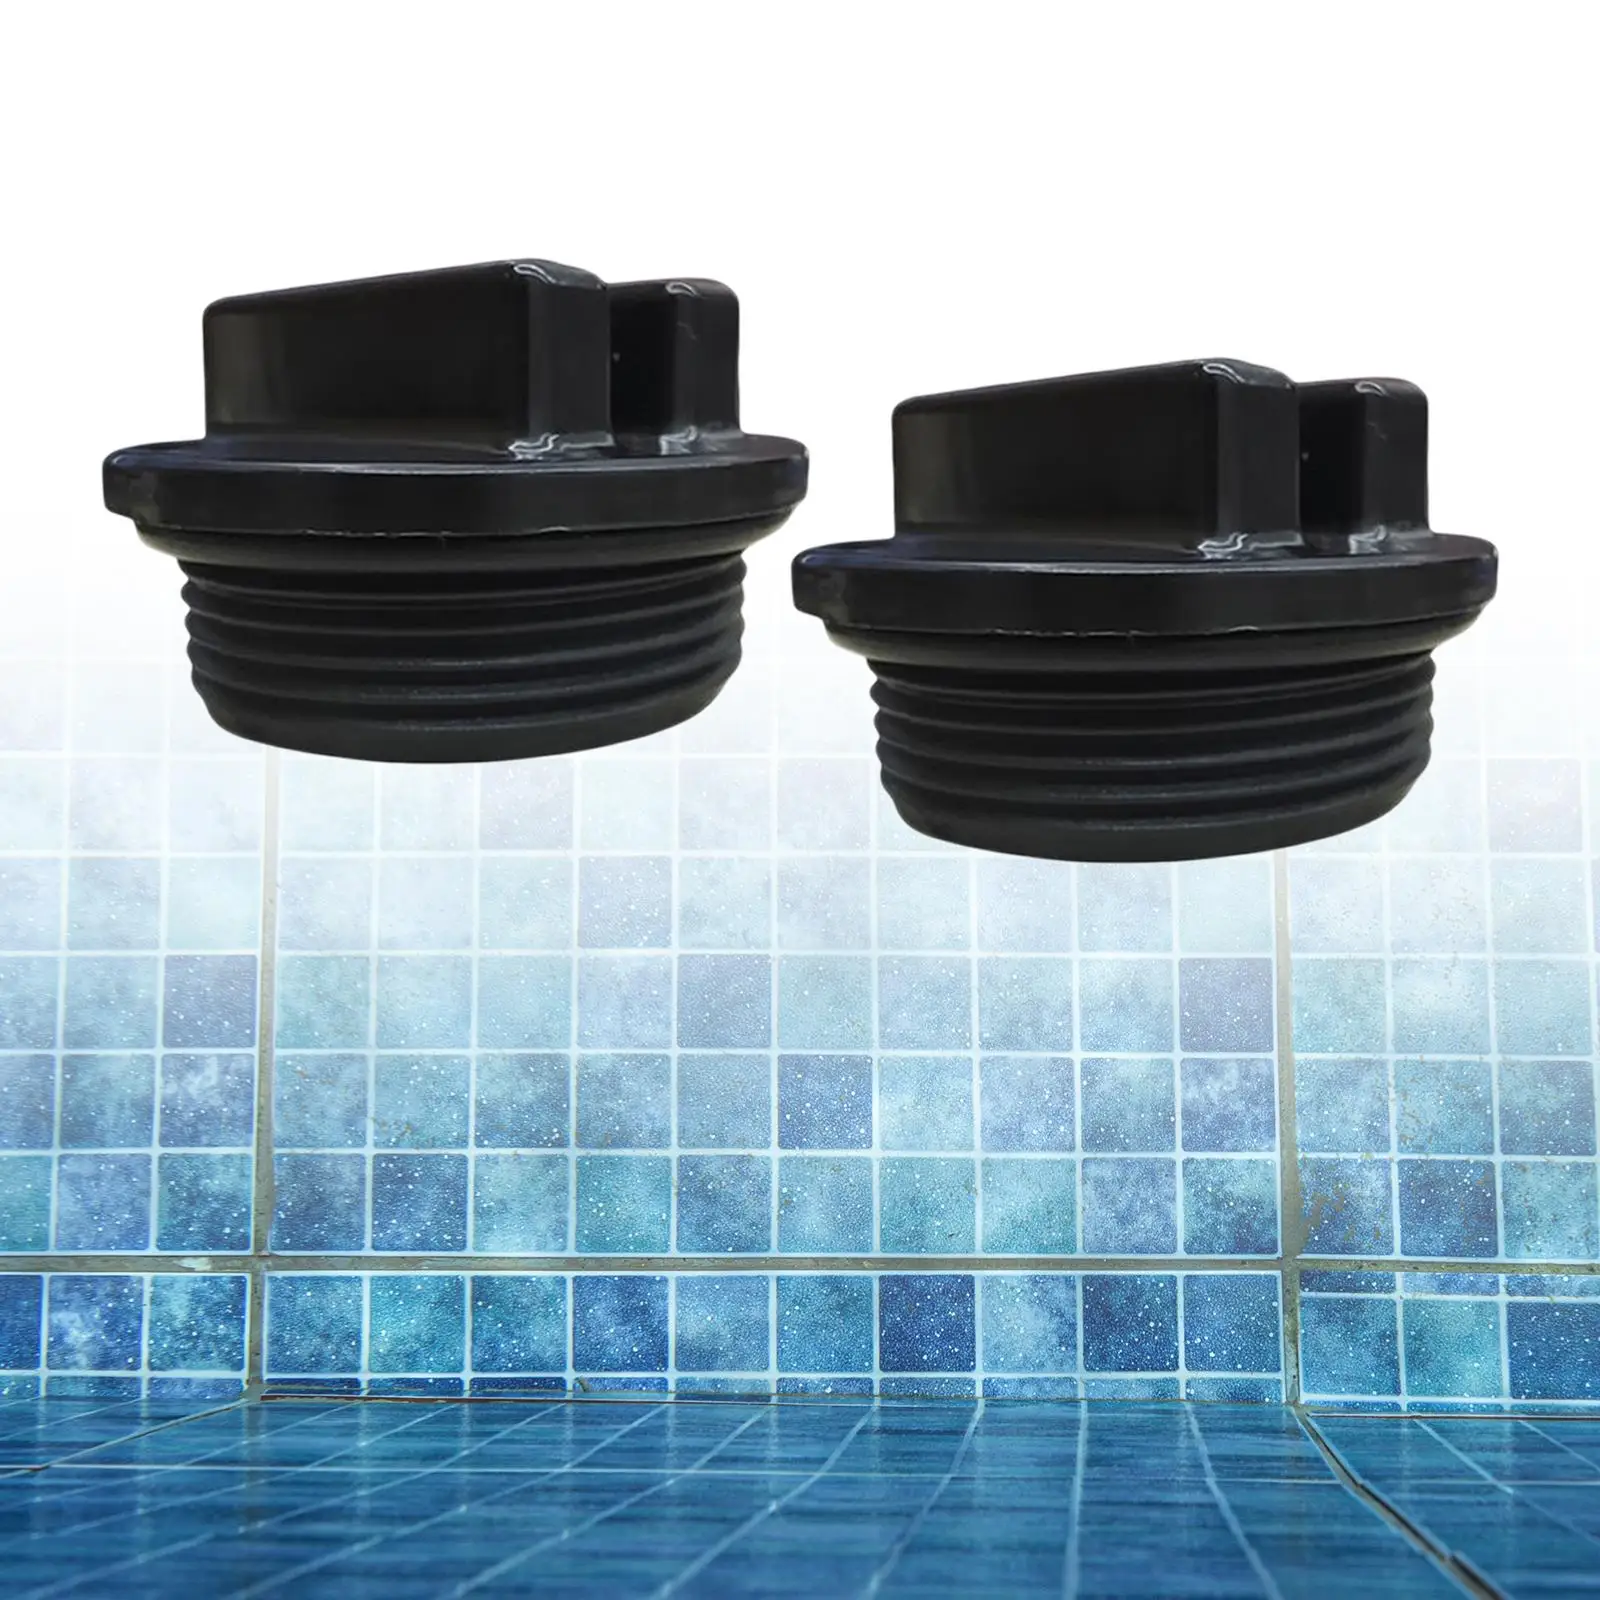 2Pcs Threaded Pool Filter Drains Replacement Parts Drain Cover Outlet Plugs 1.5